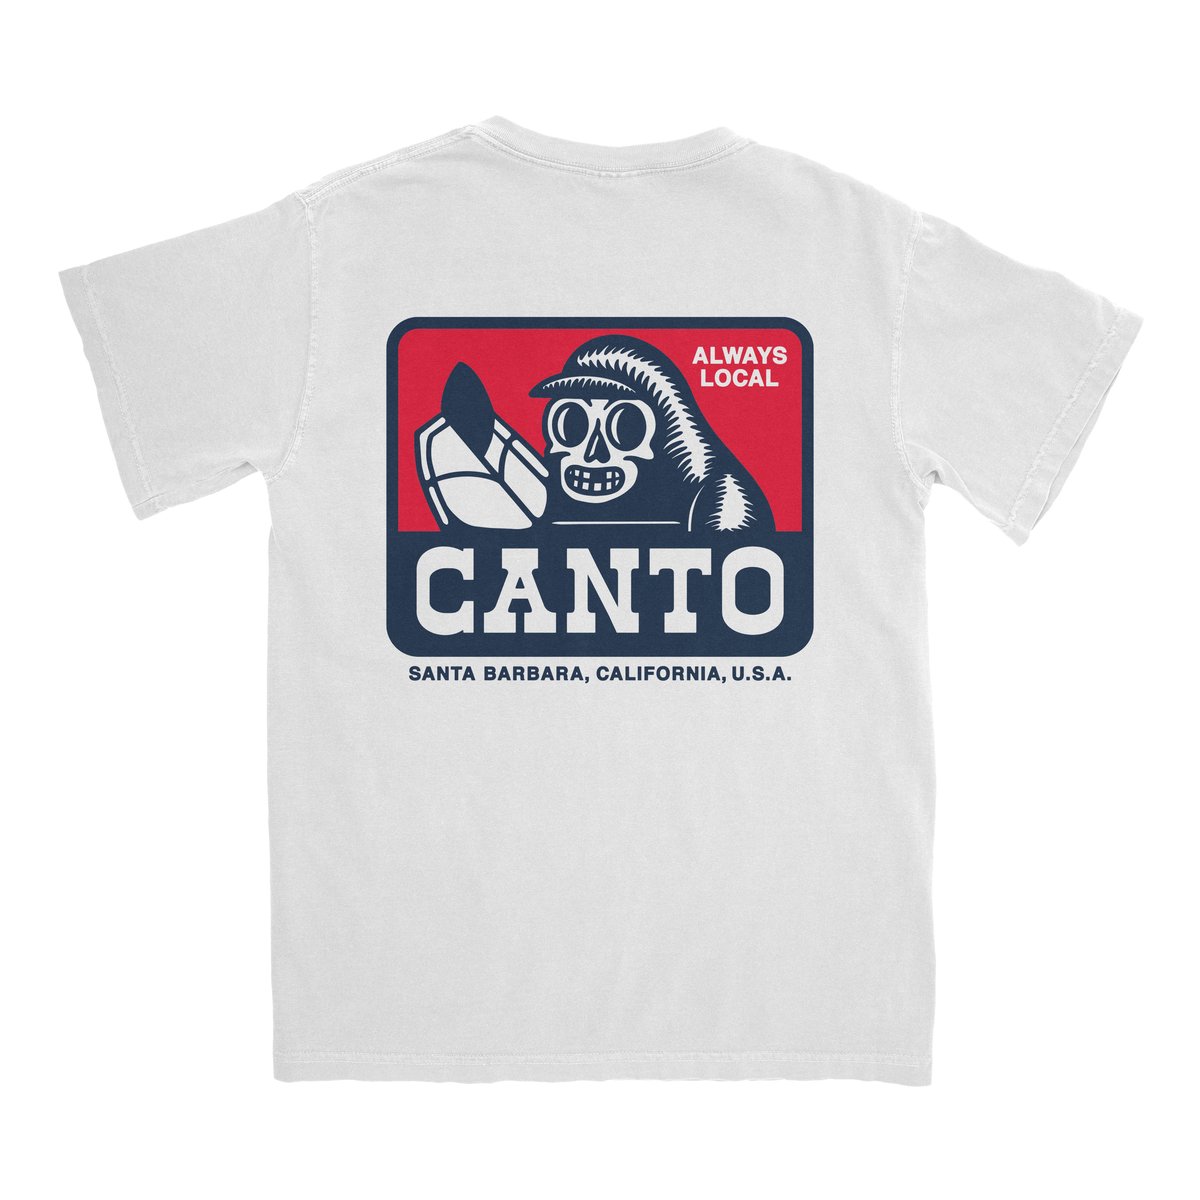 Image of Ben Canto Pocket Tee 